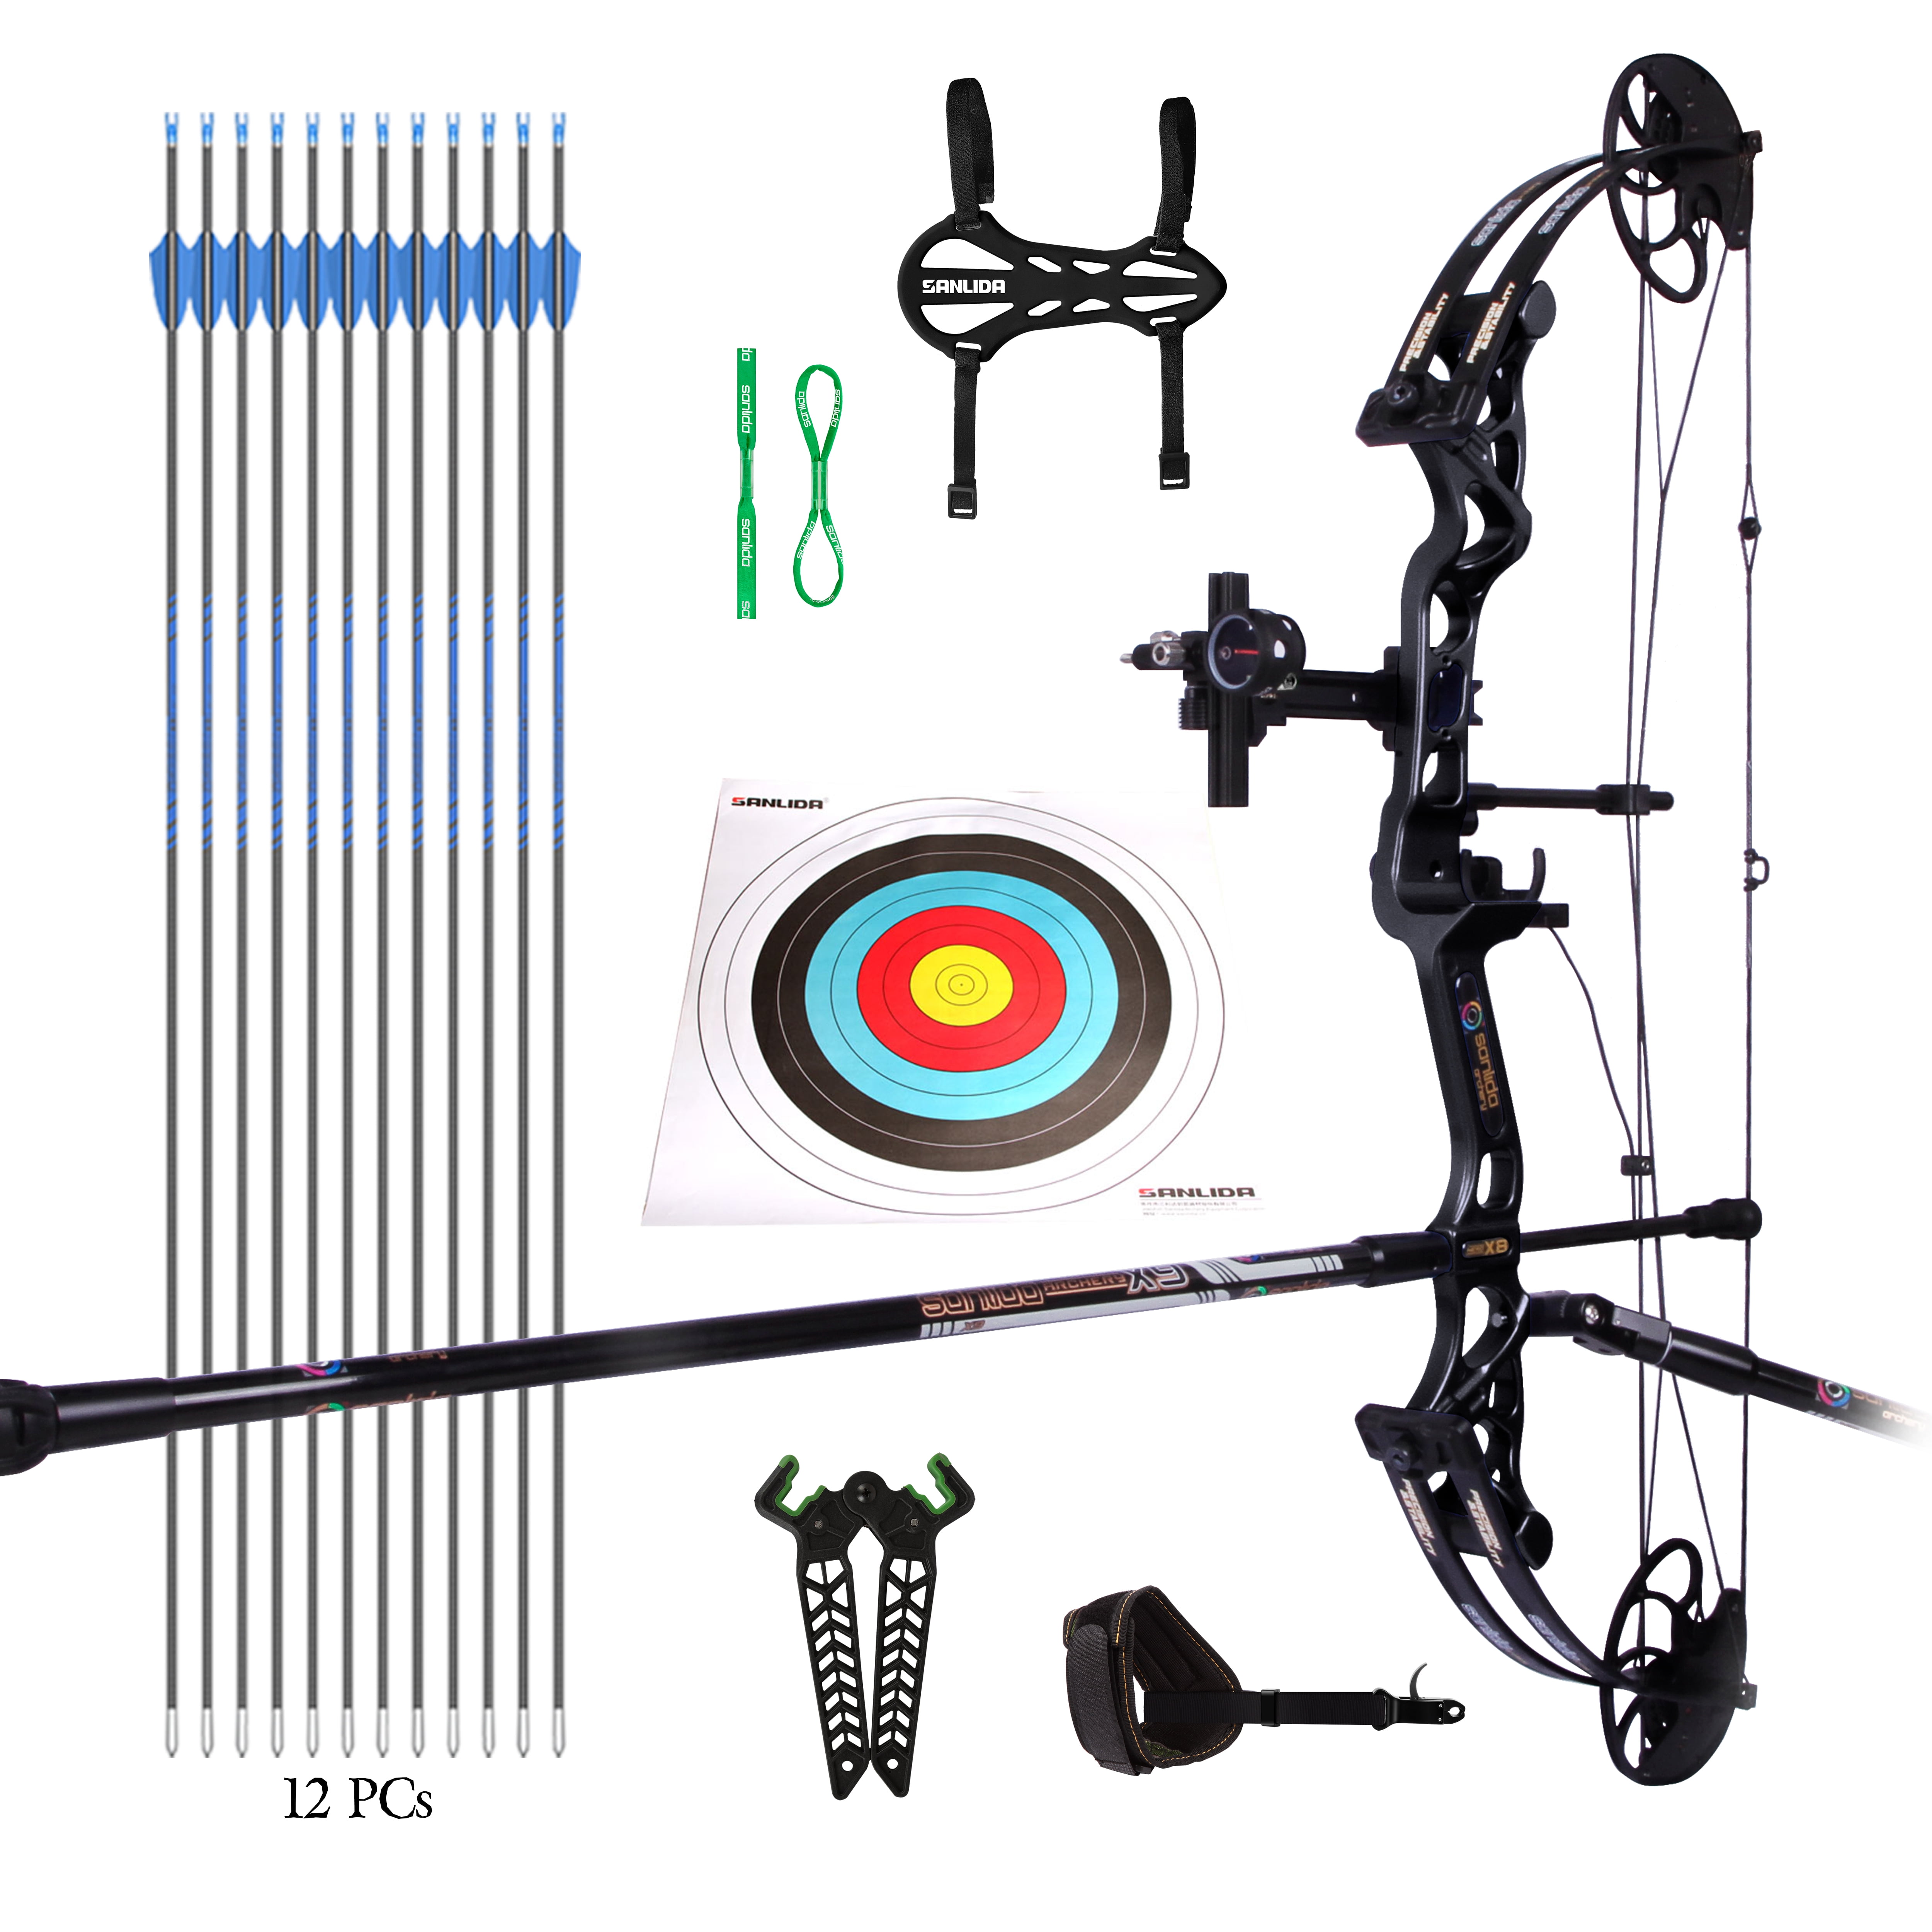 DJH Archery Compound Bow Package and Arrows for Kids Beginners 17-27 Draw Length，10-30 Lbs Draw Weight Adjustable，260fps IBO Lightweight Design Bow Shooting 